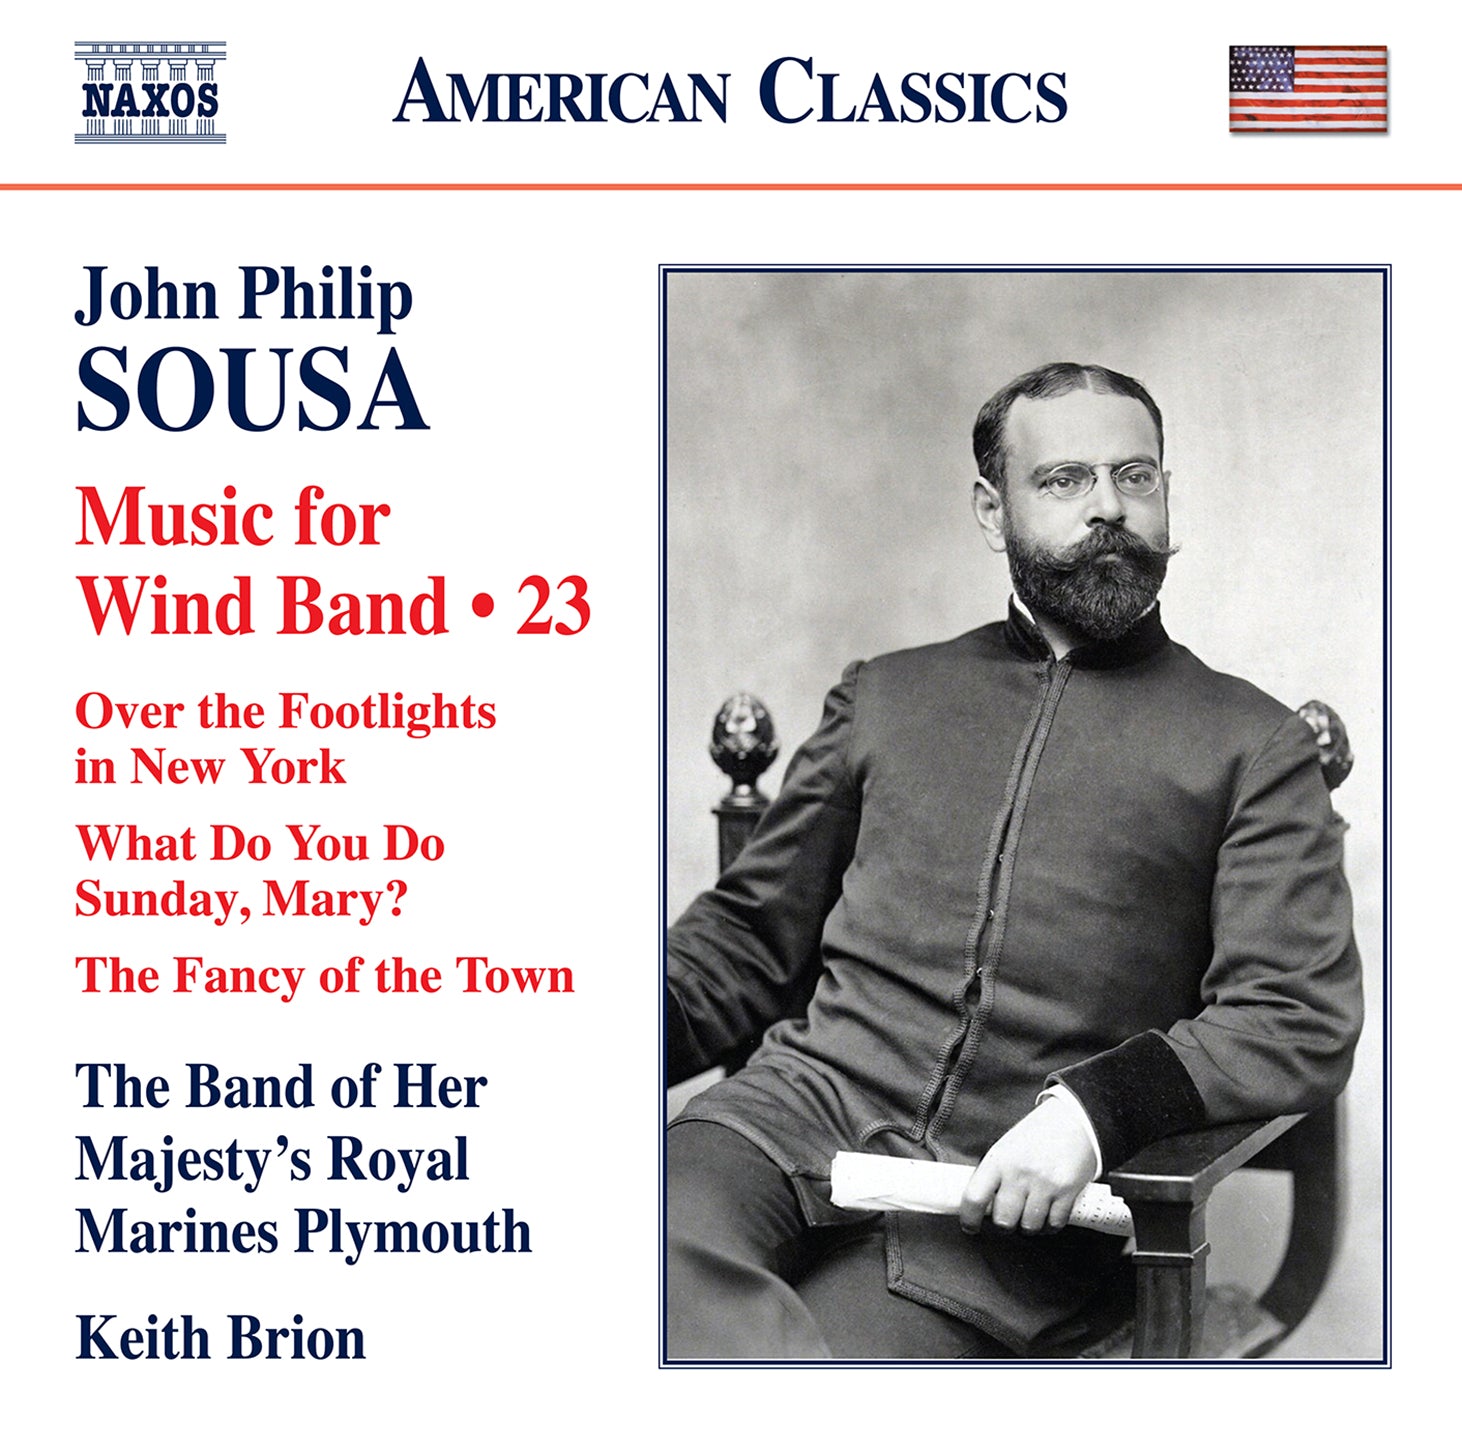 Sousa: Music for Wind Band, Vol. 23 / Brion, Her Majesty's Royal Marines Band and Choir, Plymouth